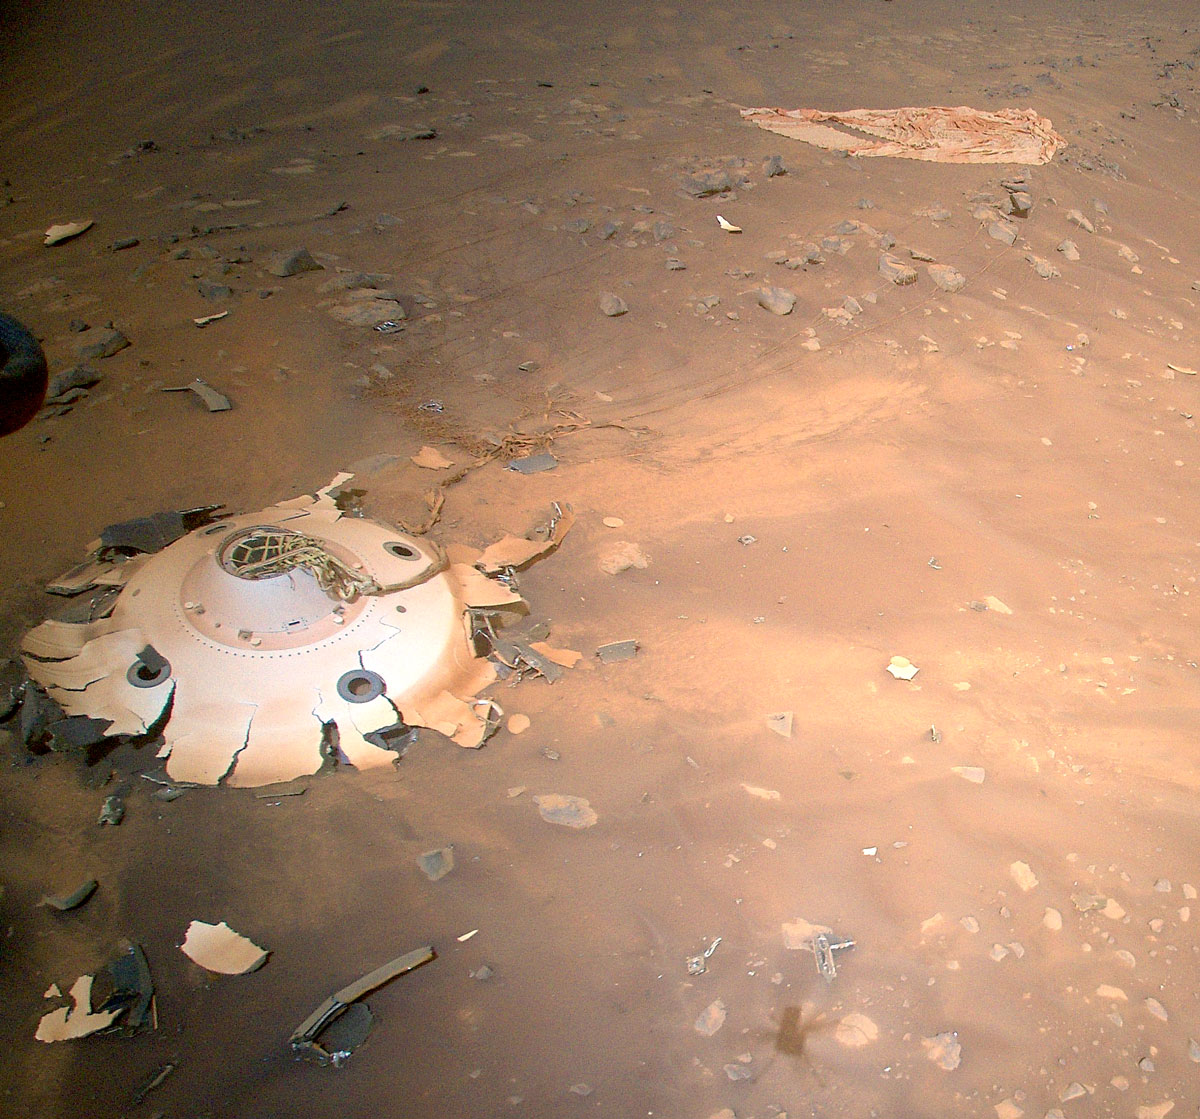 This image of the backshell and supersonic parachute of NASA’s Perseverance rover was captured by the agency’s Ingenuity Mars Helicopter during its 26th flight on Mars on April 19, 2022.